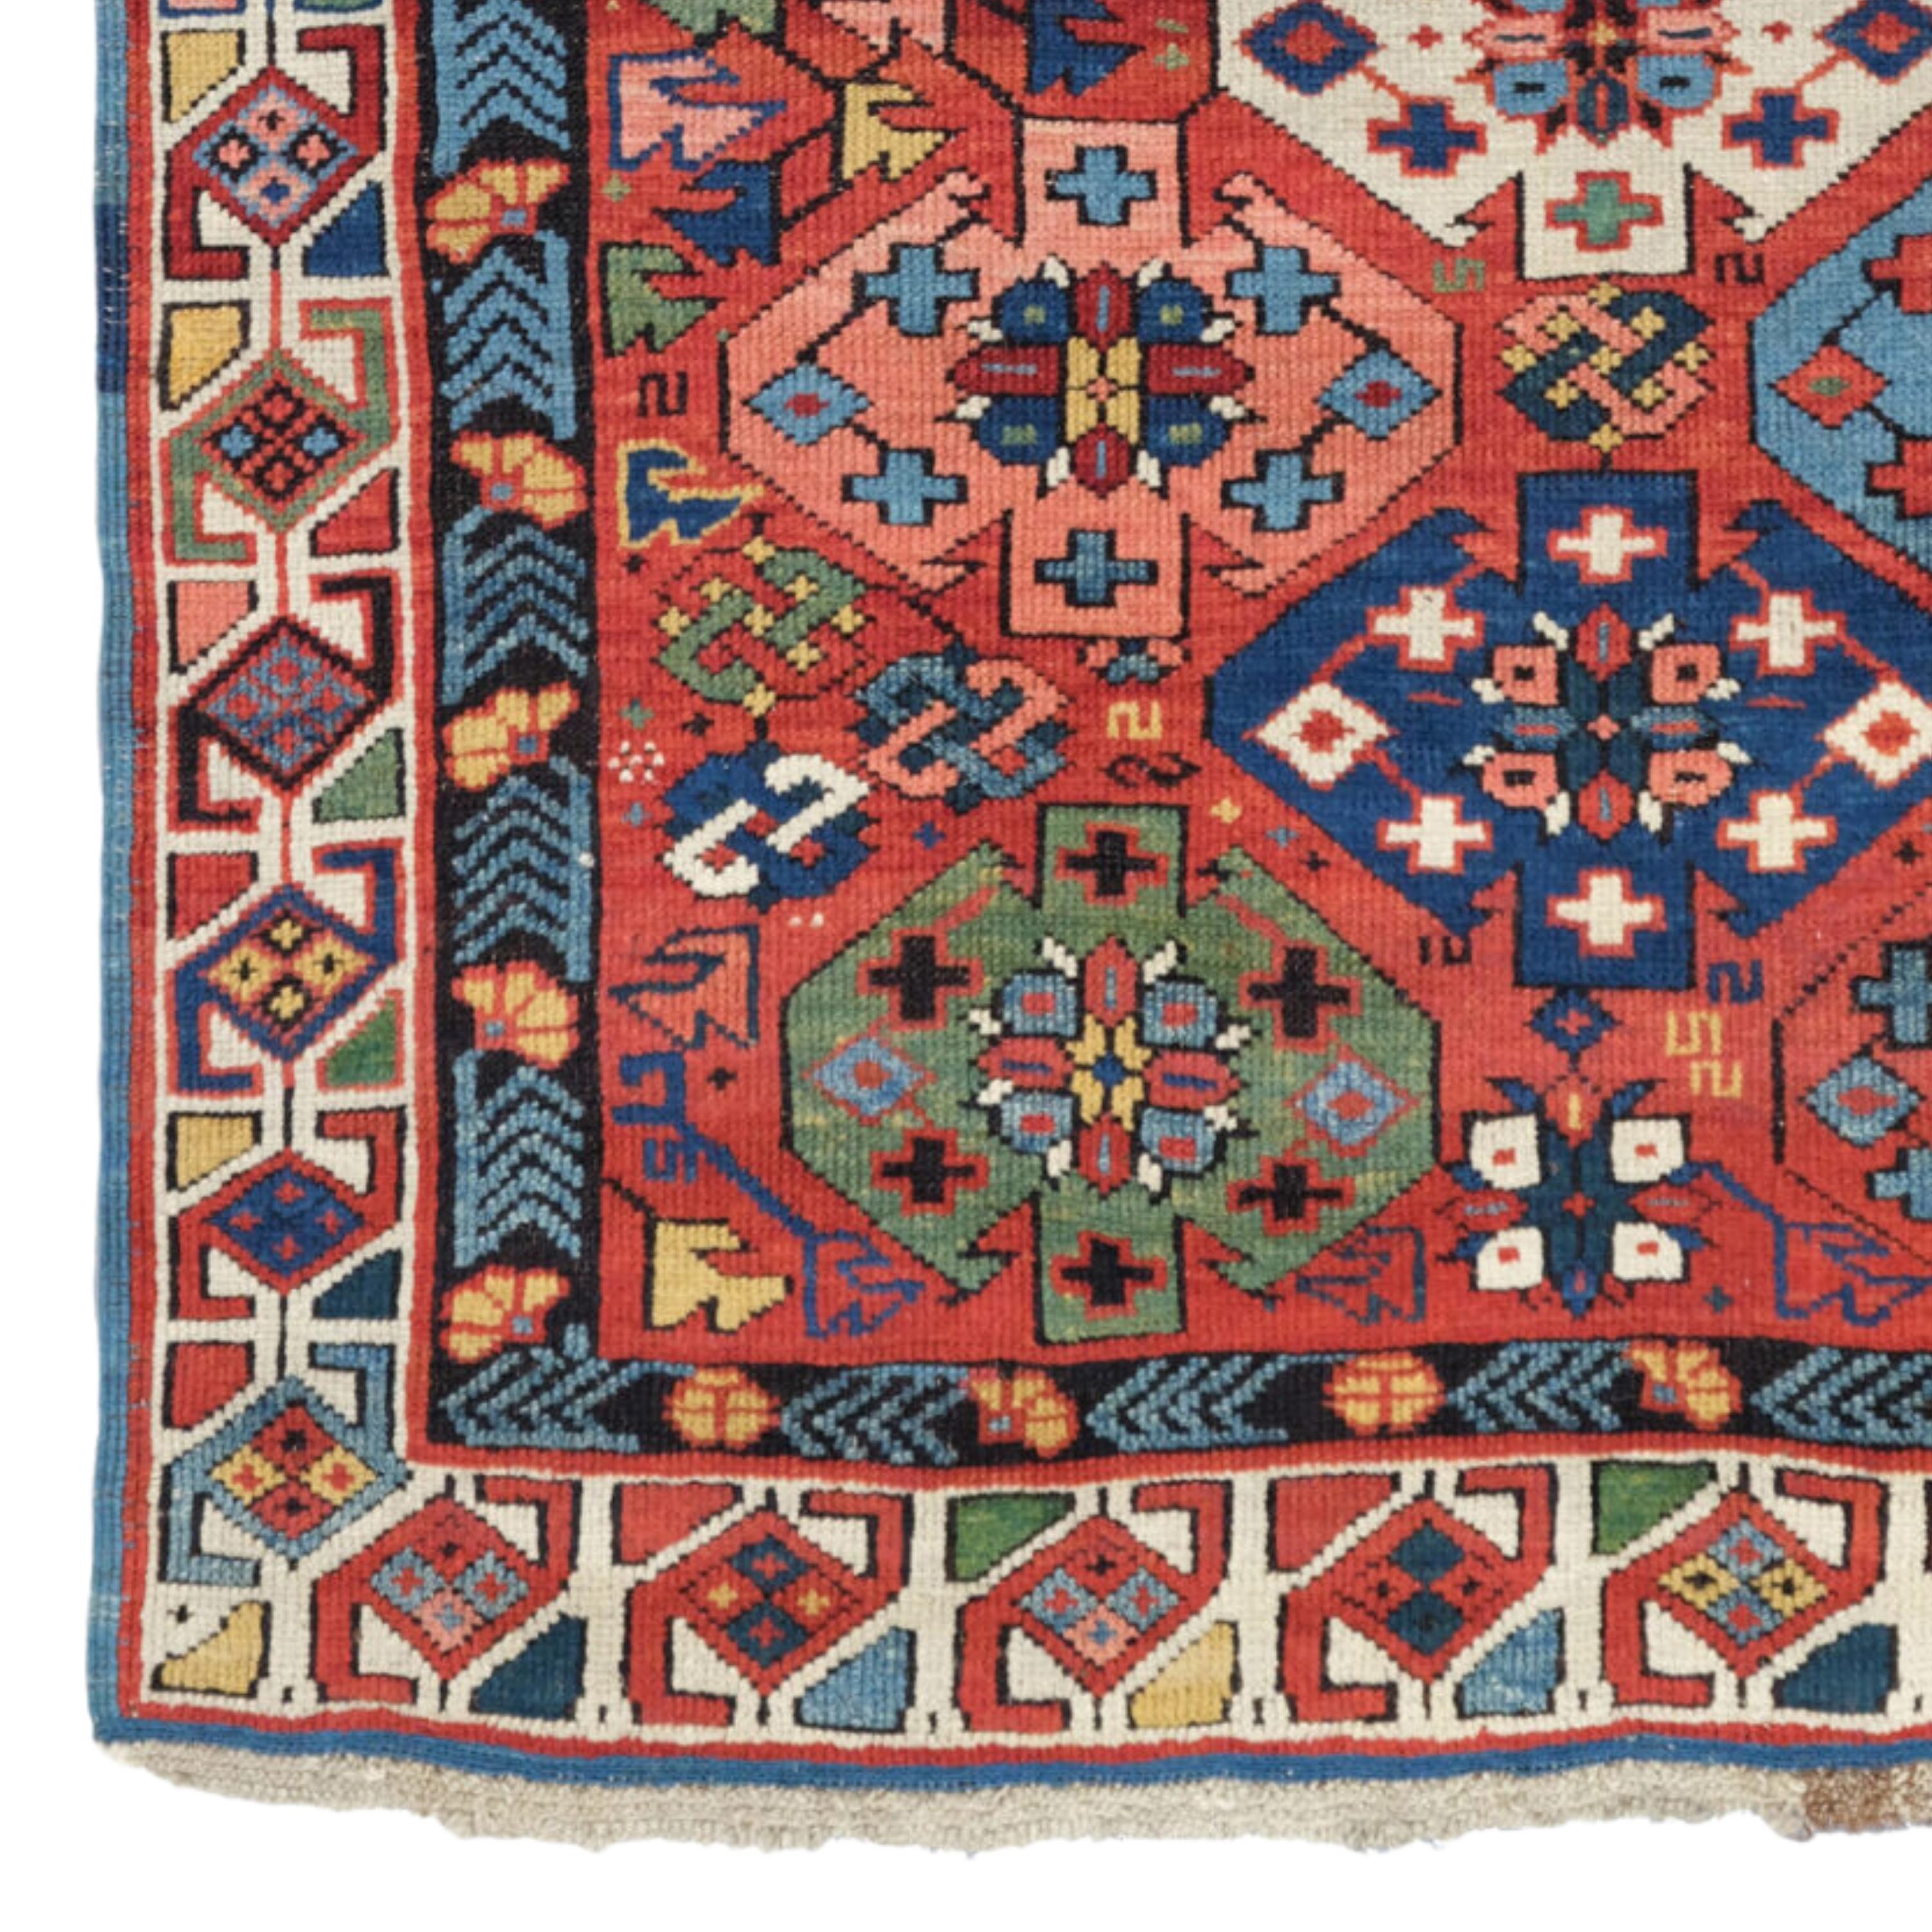 Antique Shirvan Rug - Shirvan rug from the late 19th century 97x147 cm (38,1x57,8 In)

Shirvan carpet is a handmade floor covering in the Shirvan region of Azerbaijan in the Southeastern Caucasus.
Most Shirvan carpets cannot be specifically